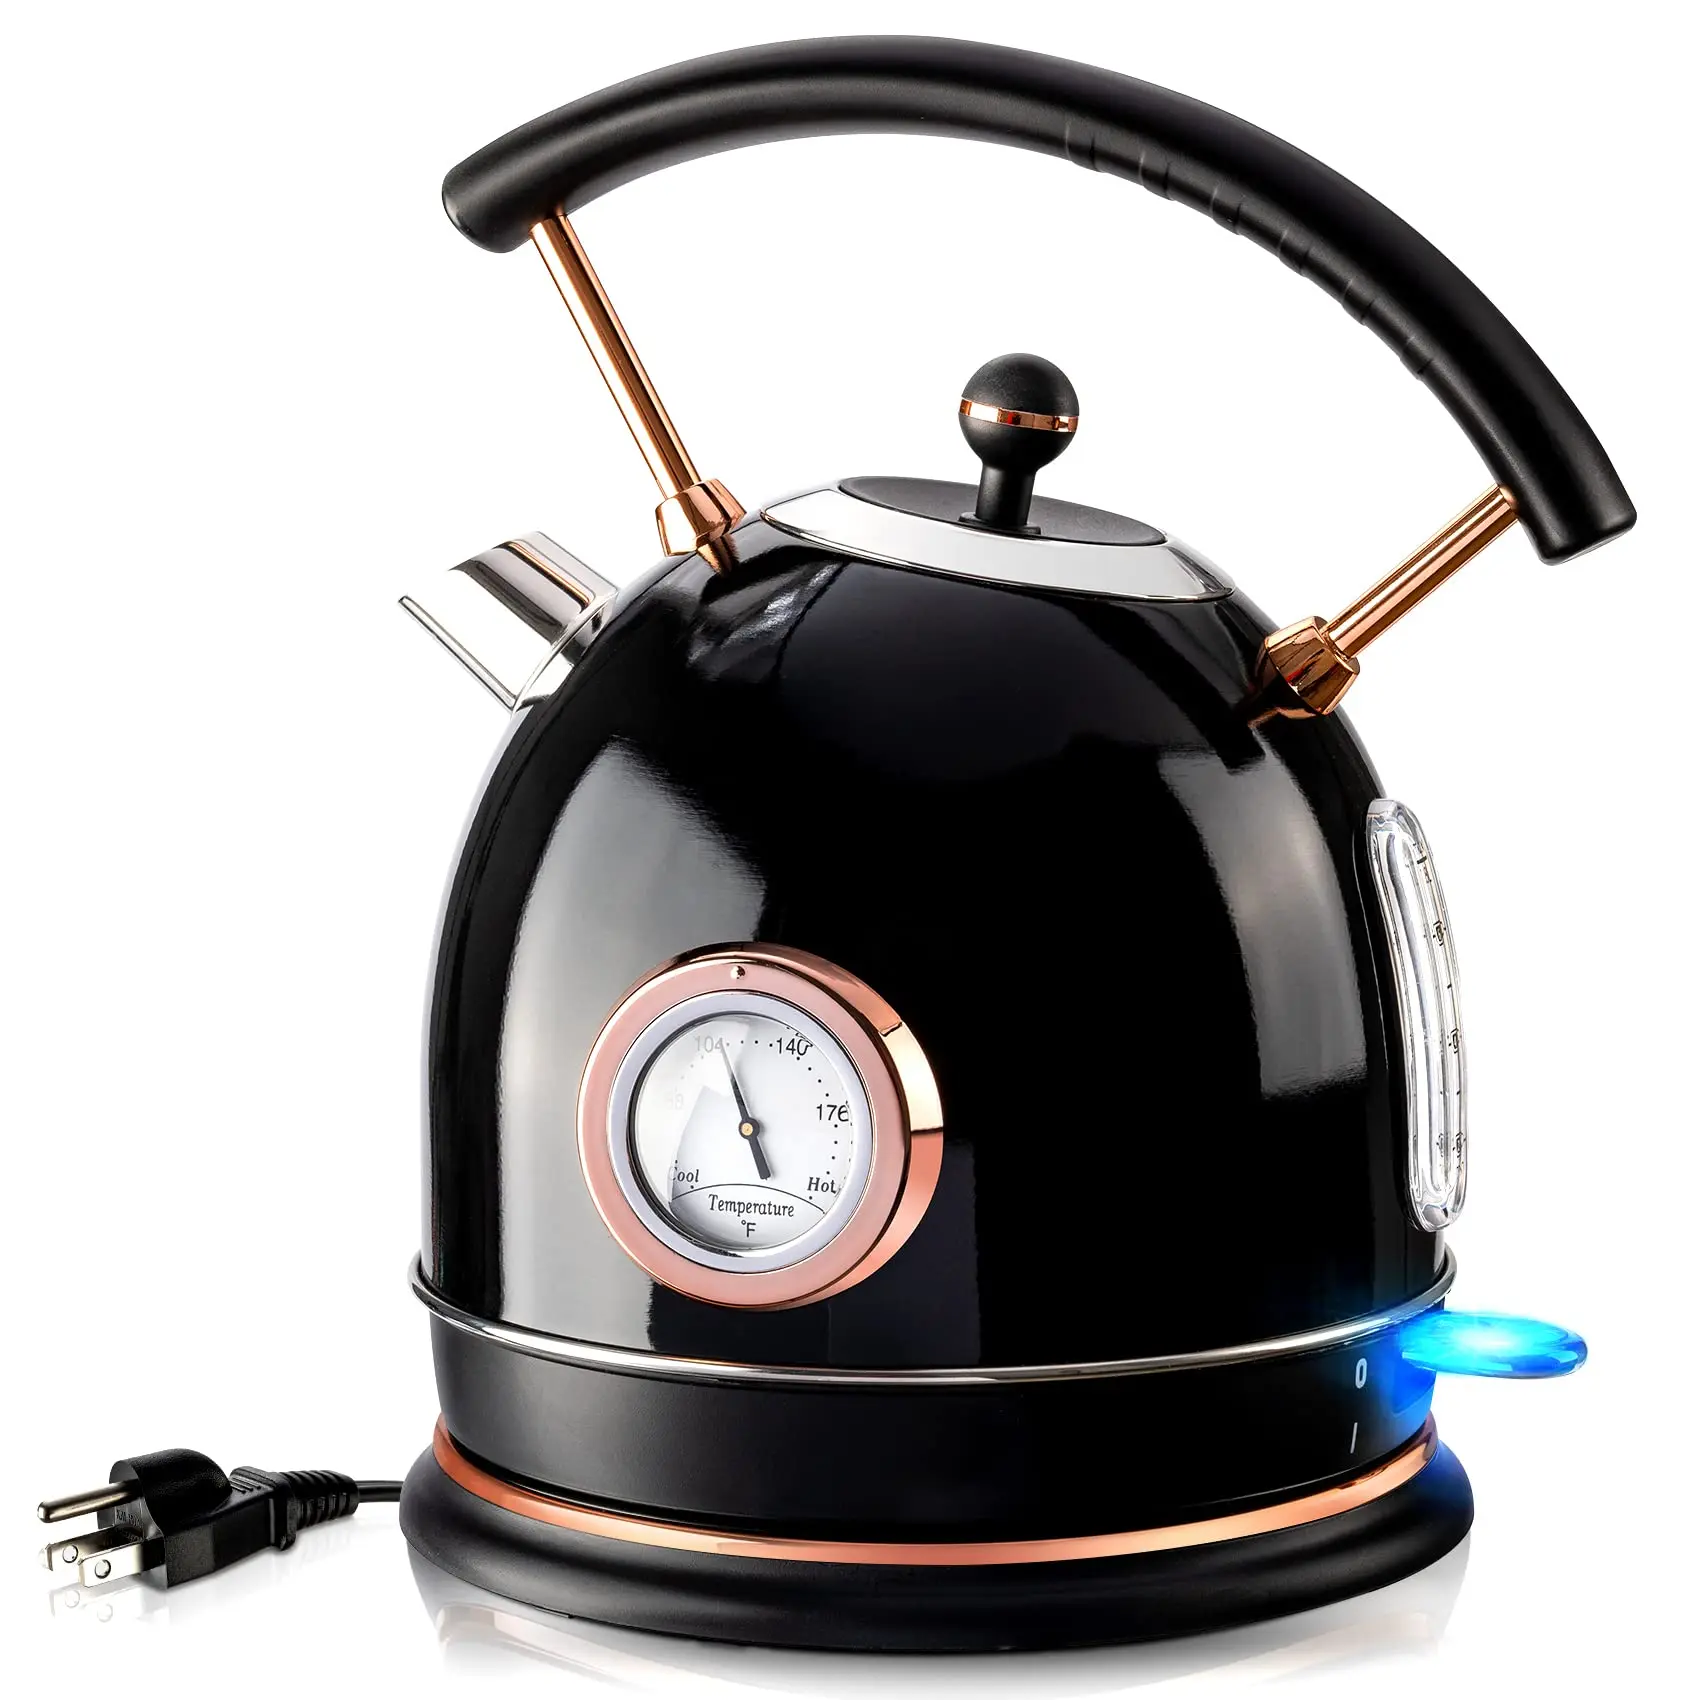 1.8L Black Retro Stainless Steel Electric Kettle , Fast Boiling, LED Light, Temperature Gauge, Auto Shut-Off&Boil-Dry Protection